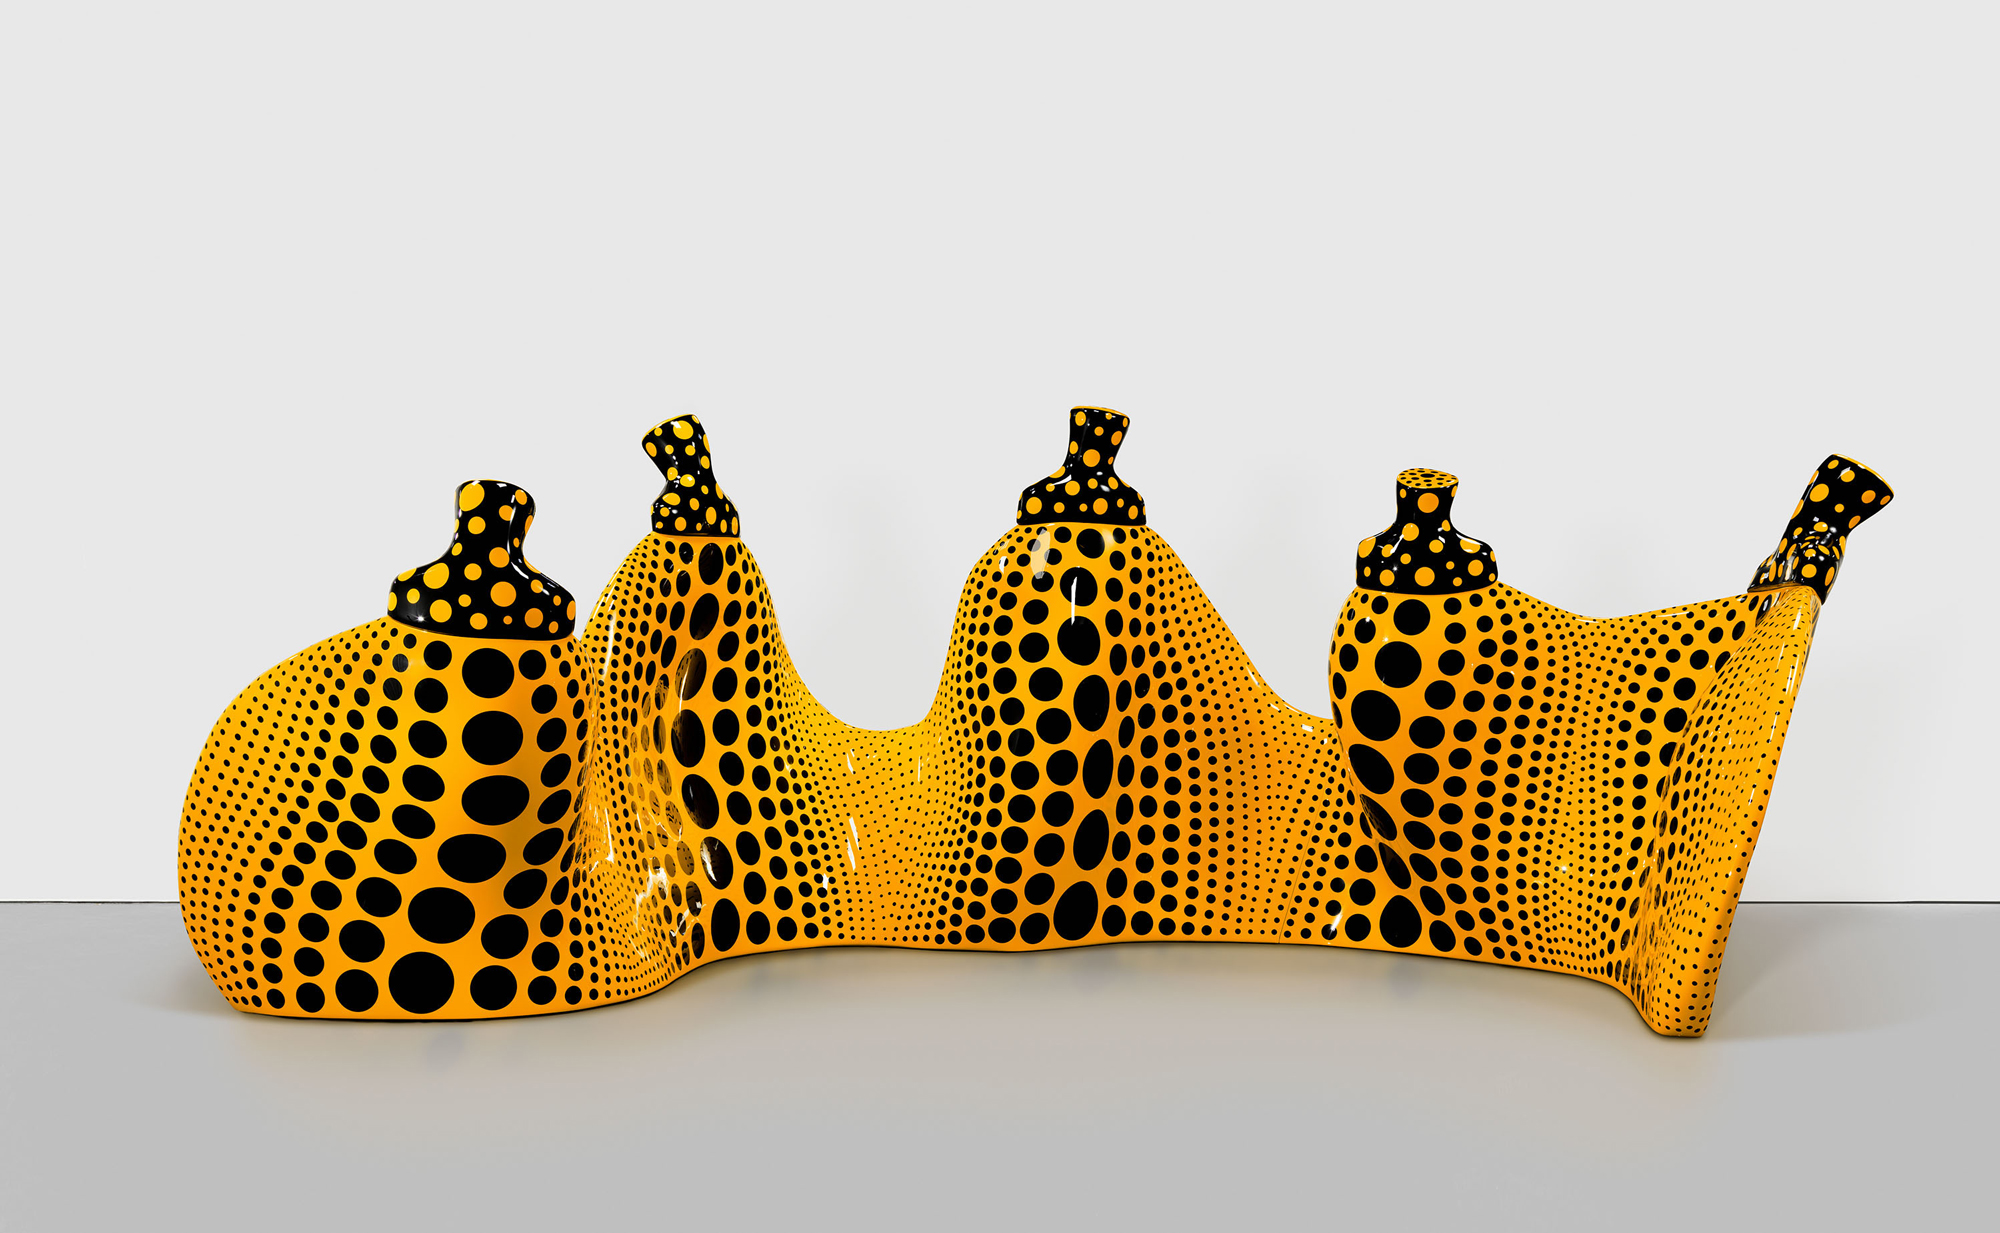 Sculpture of five conjoined pumpkin shapes painted yellow with black dots